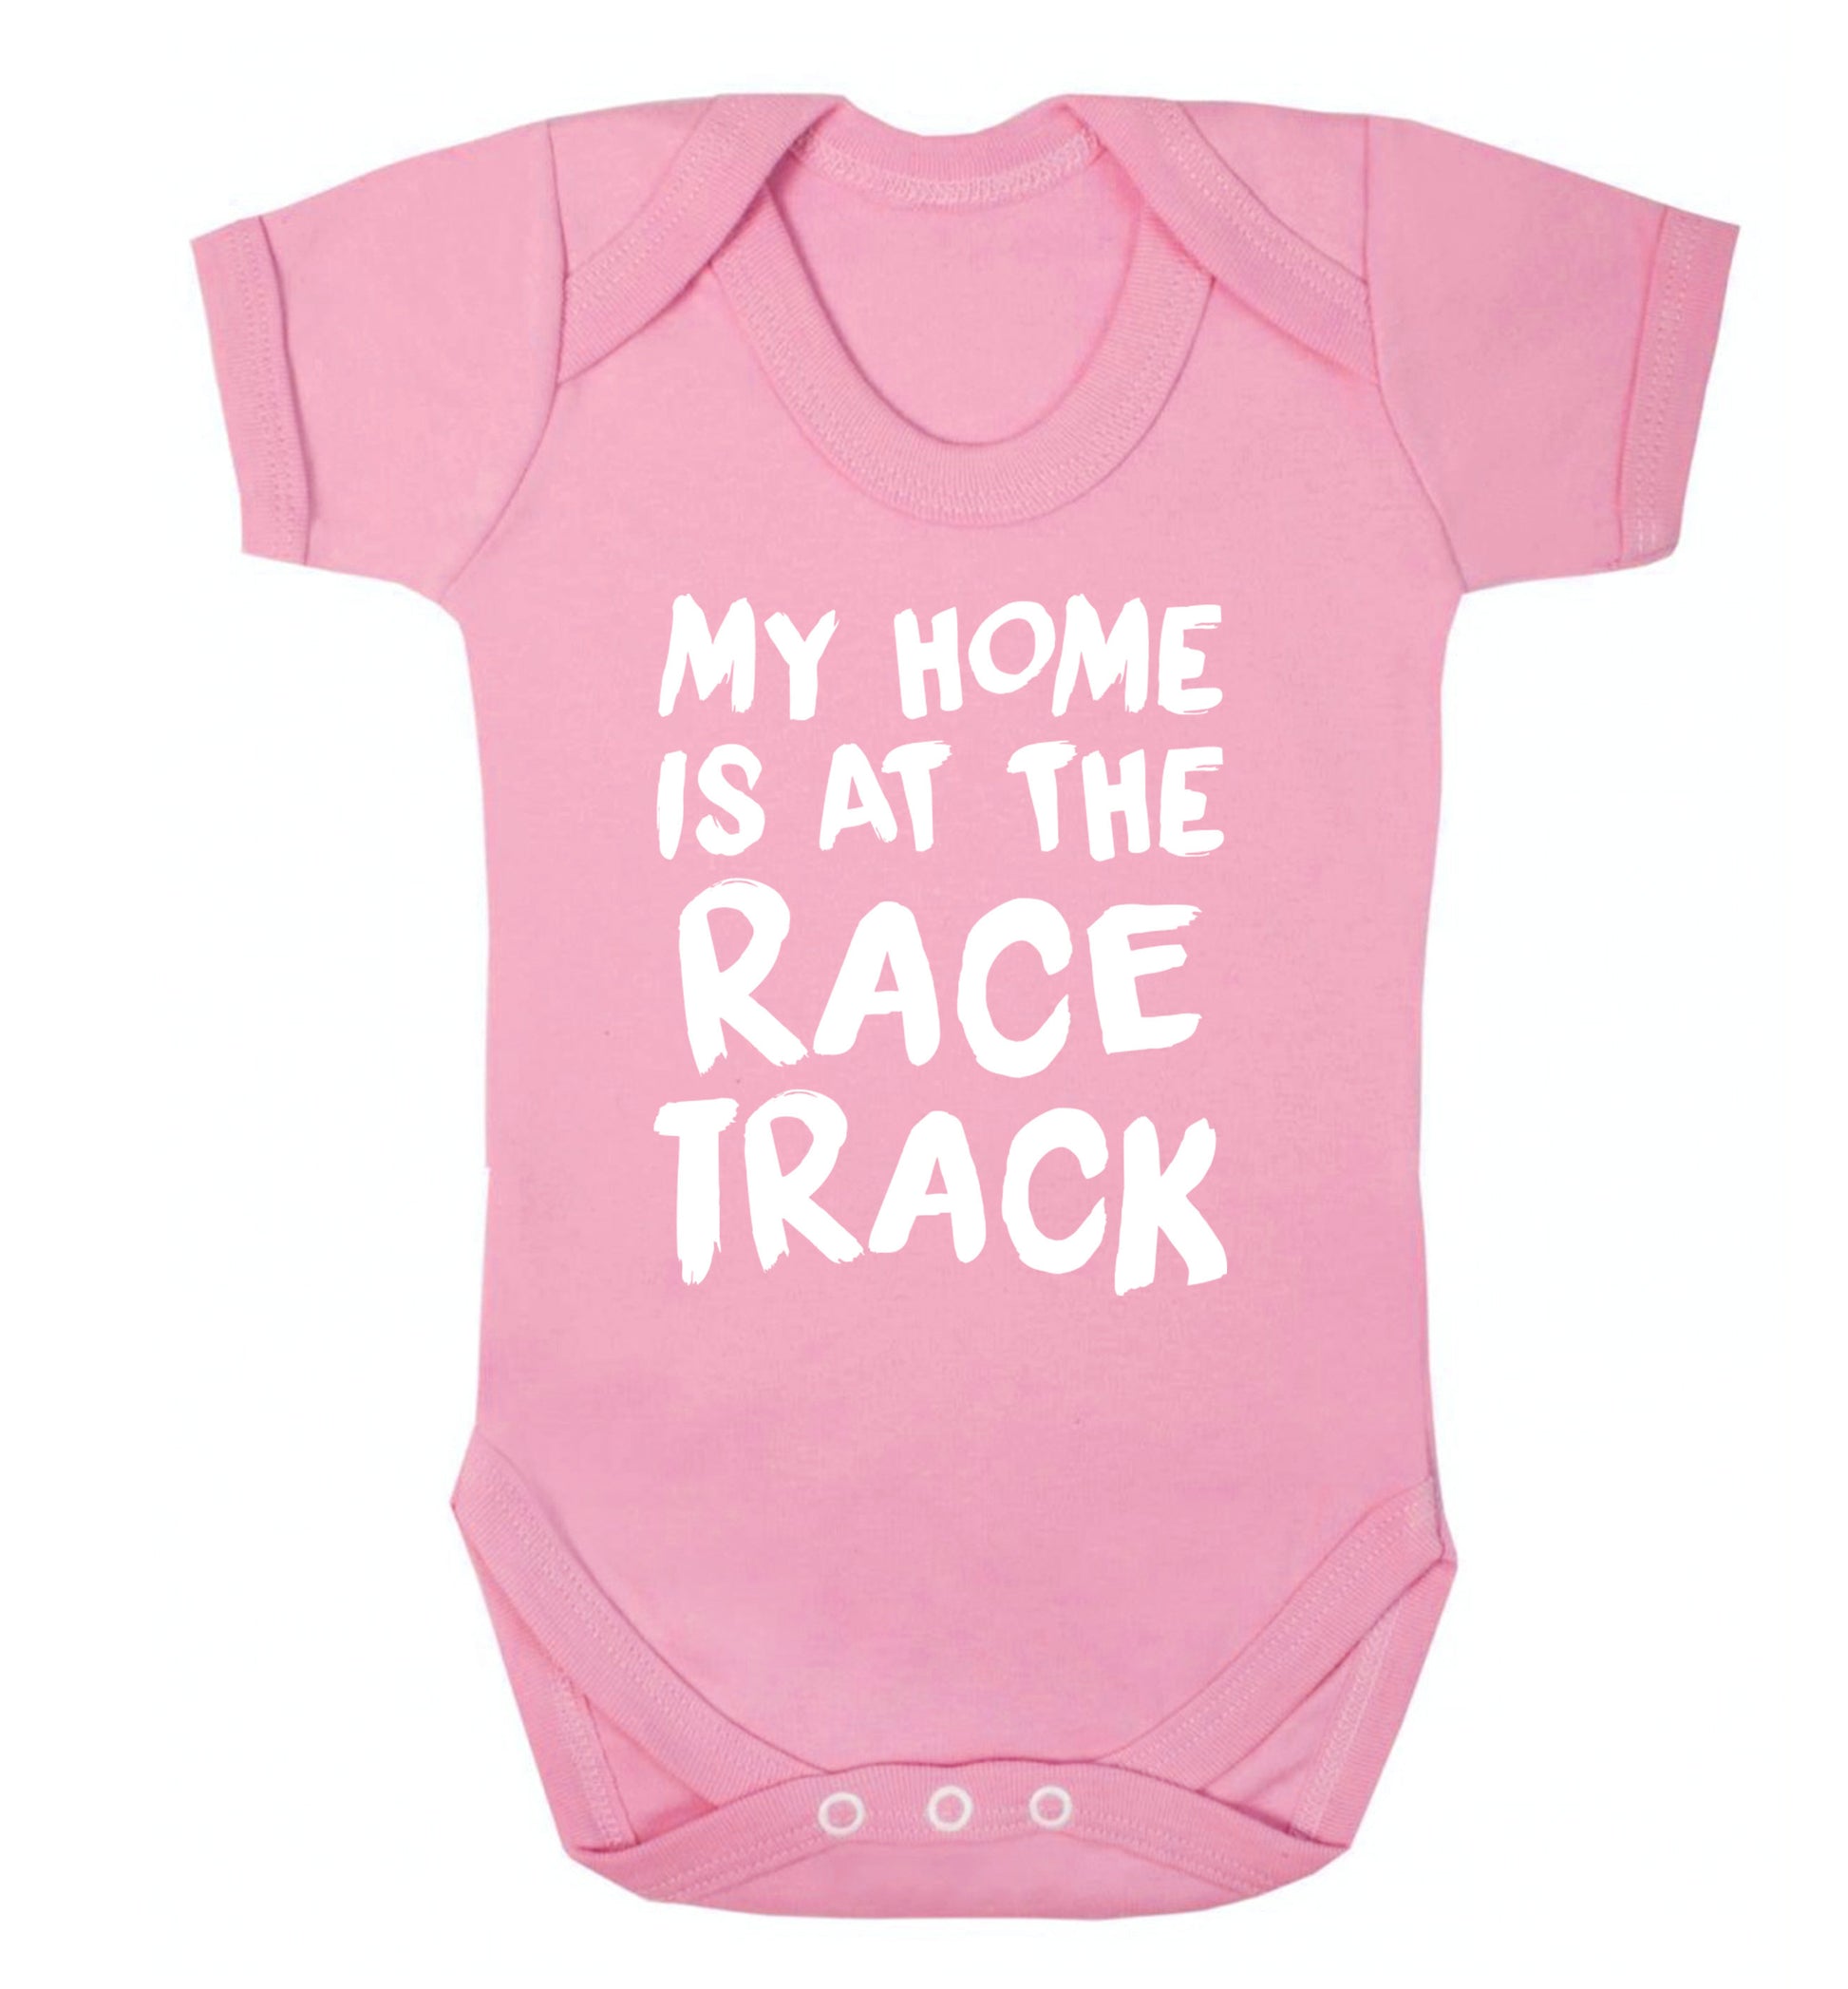 My home is at the race track Baby Vest pale pink 18-24 months